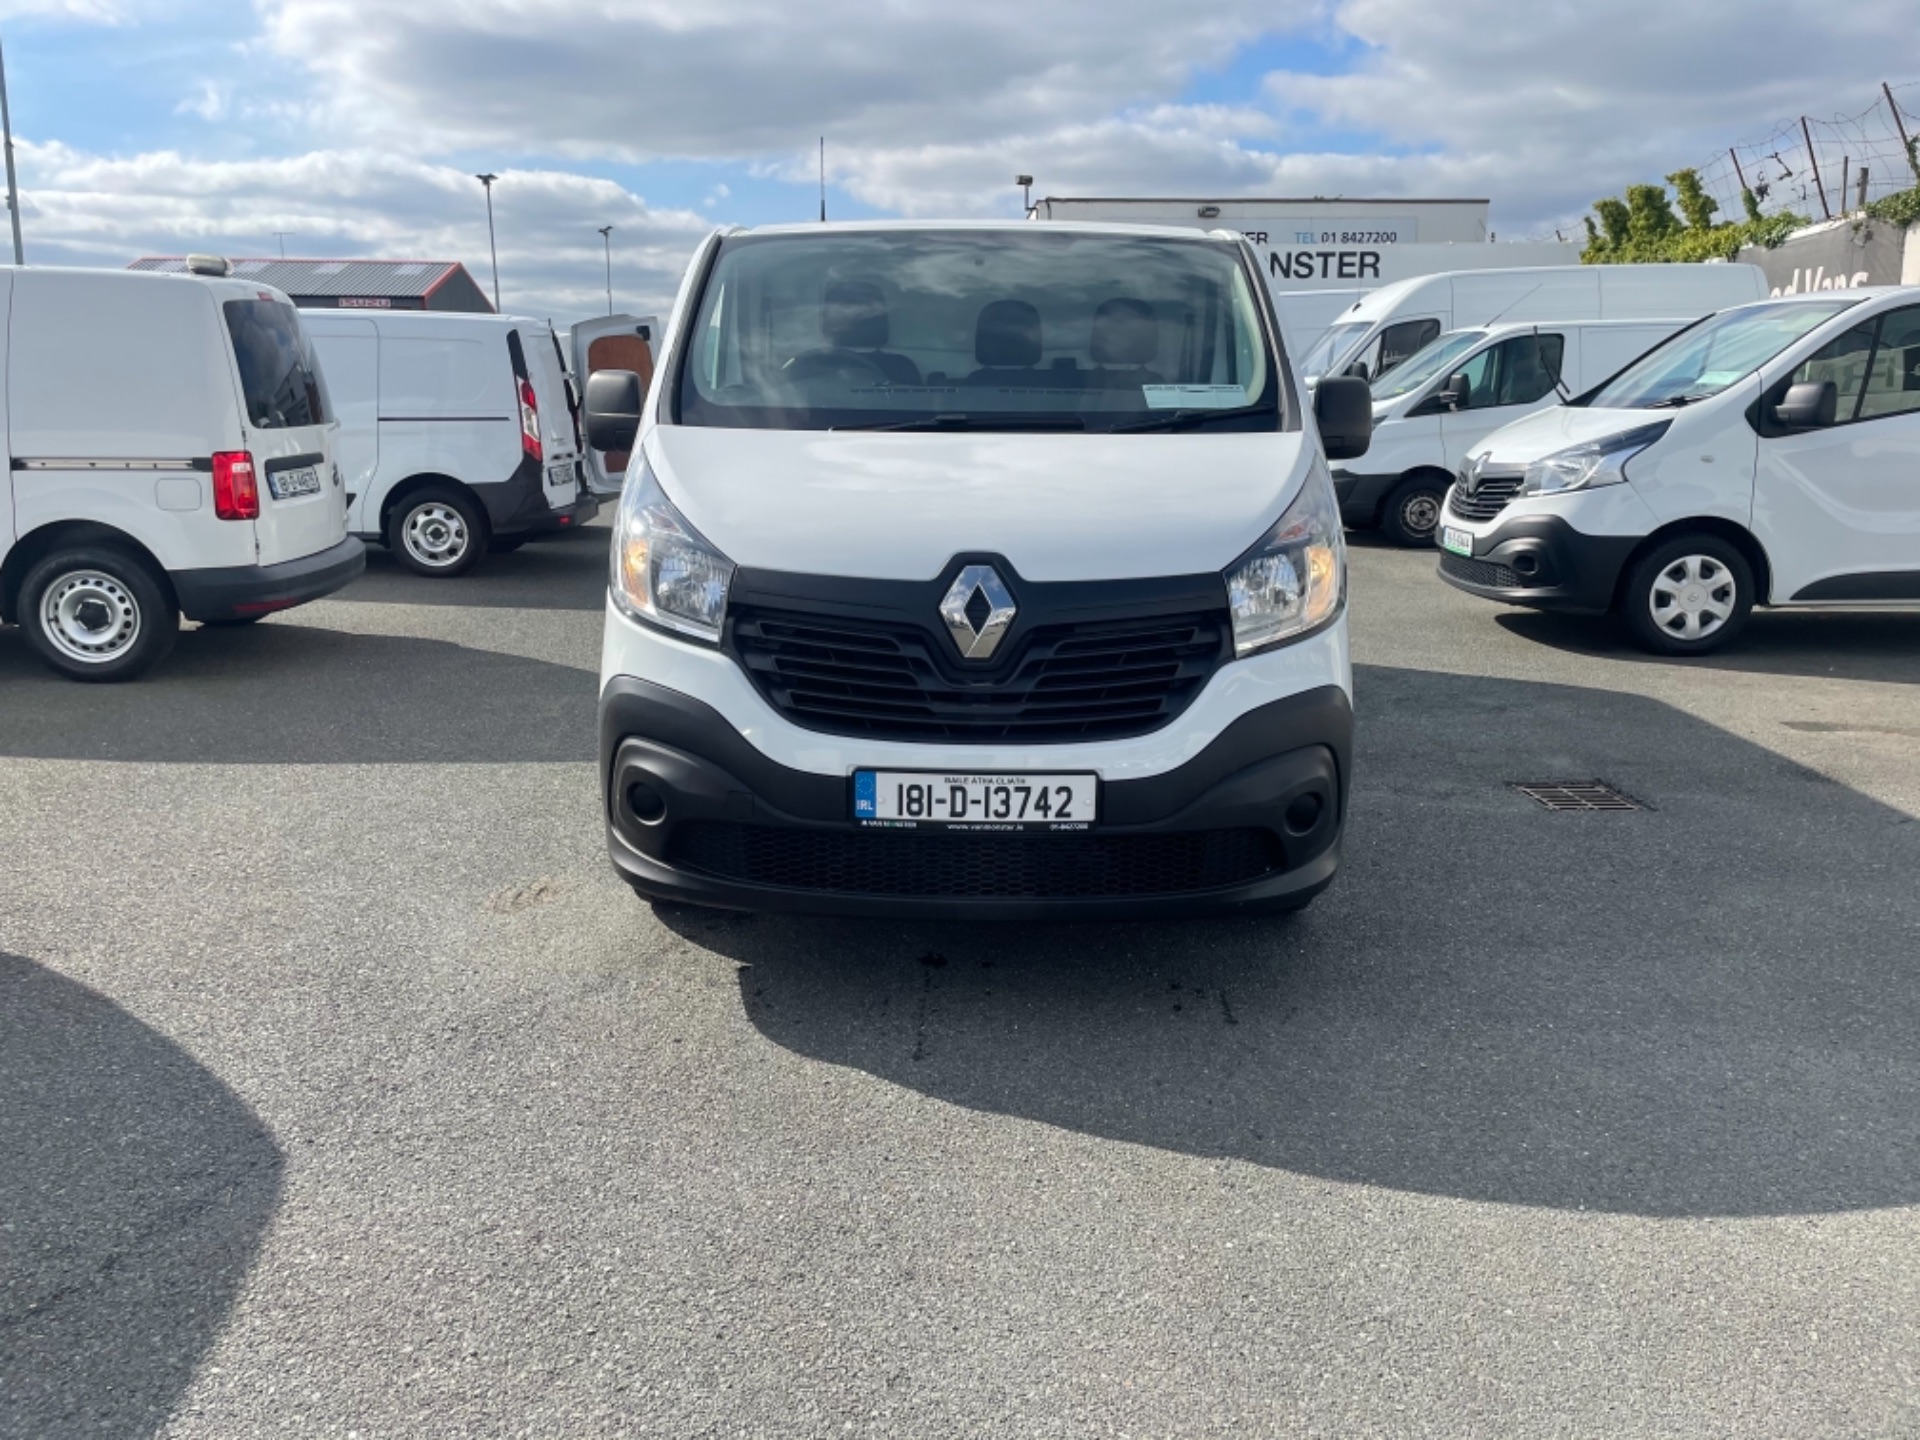 2018 Renault Trafic LL29 DCI 120 Business 3DR (181D13742) Image 2